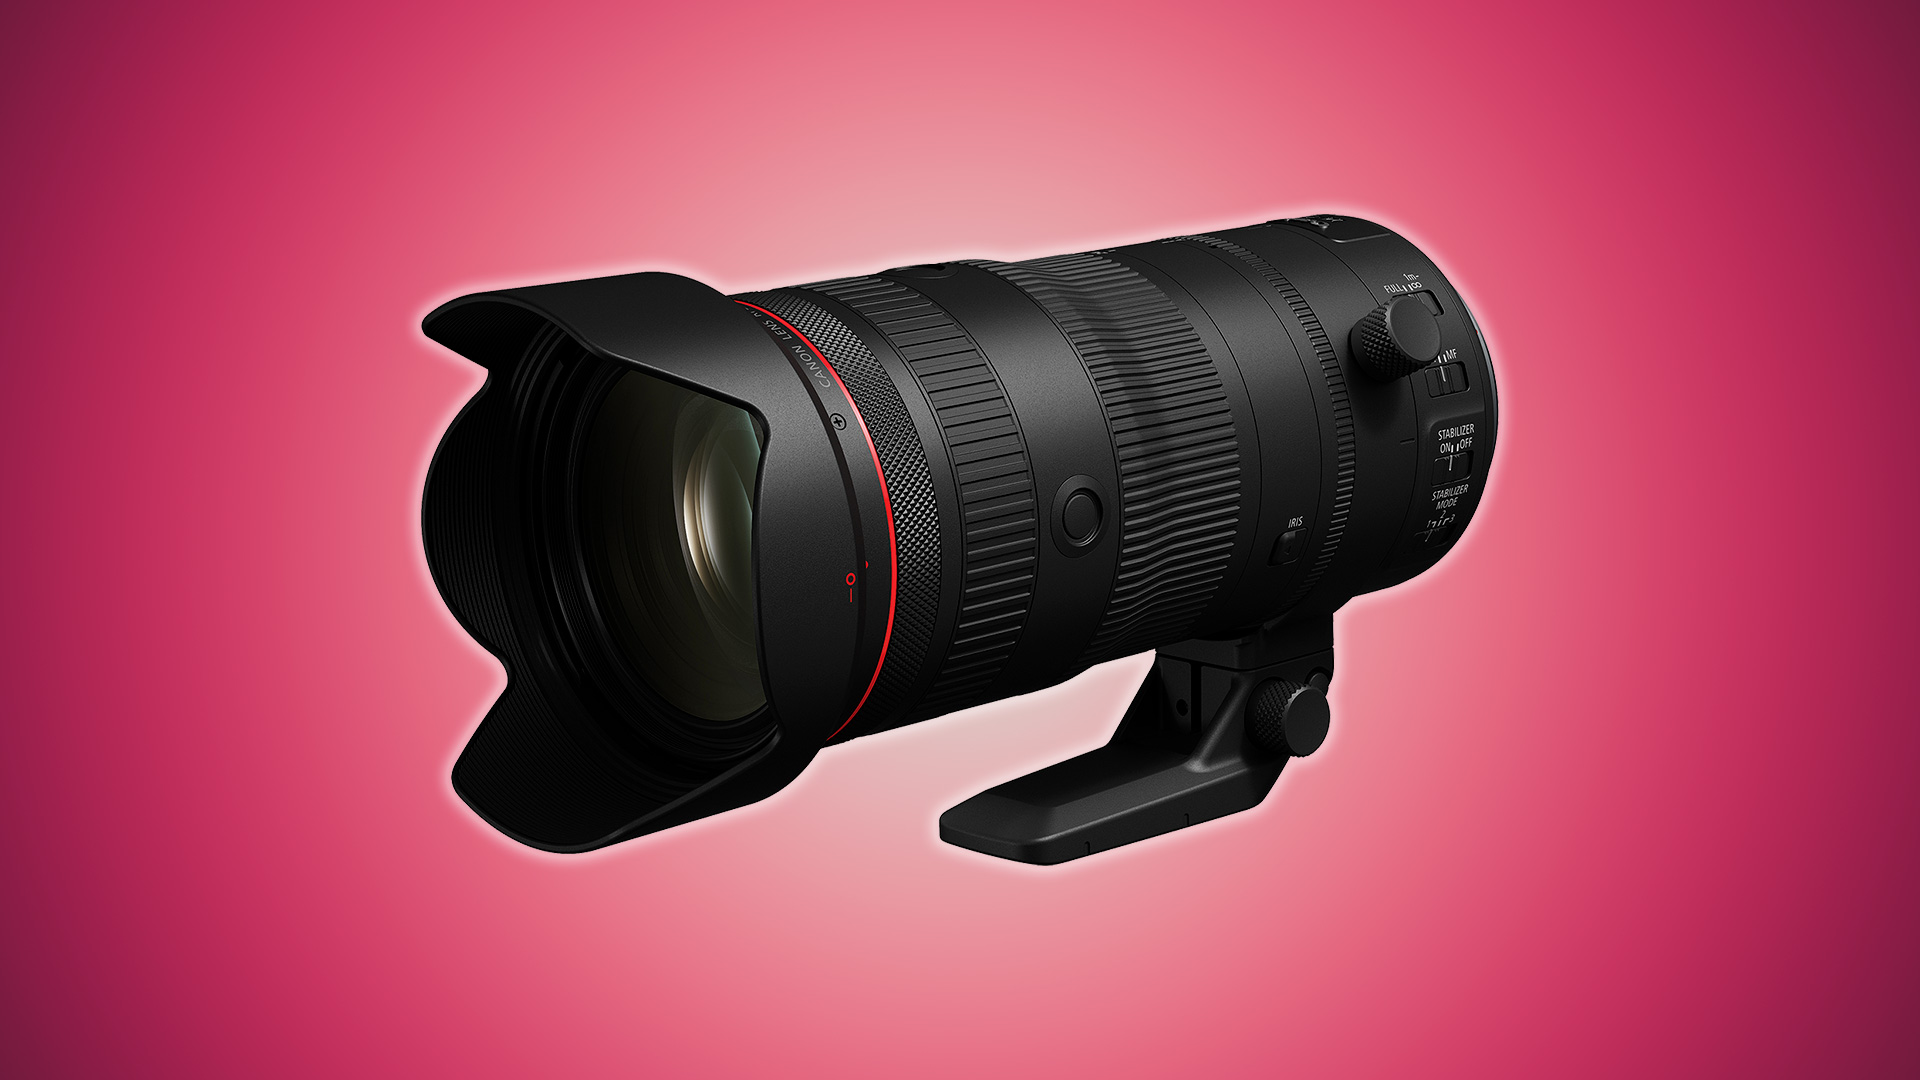 There will be a lot of new RF mount lenses from Canon between now and  March 2024